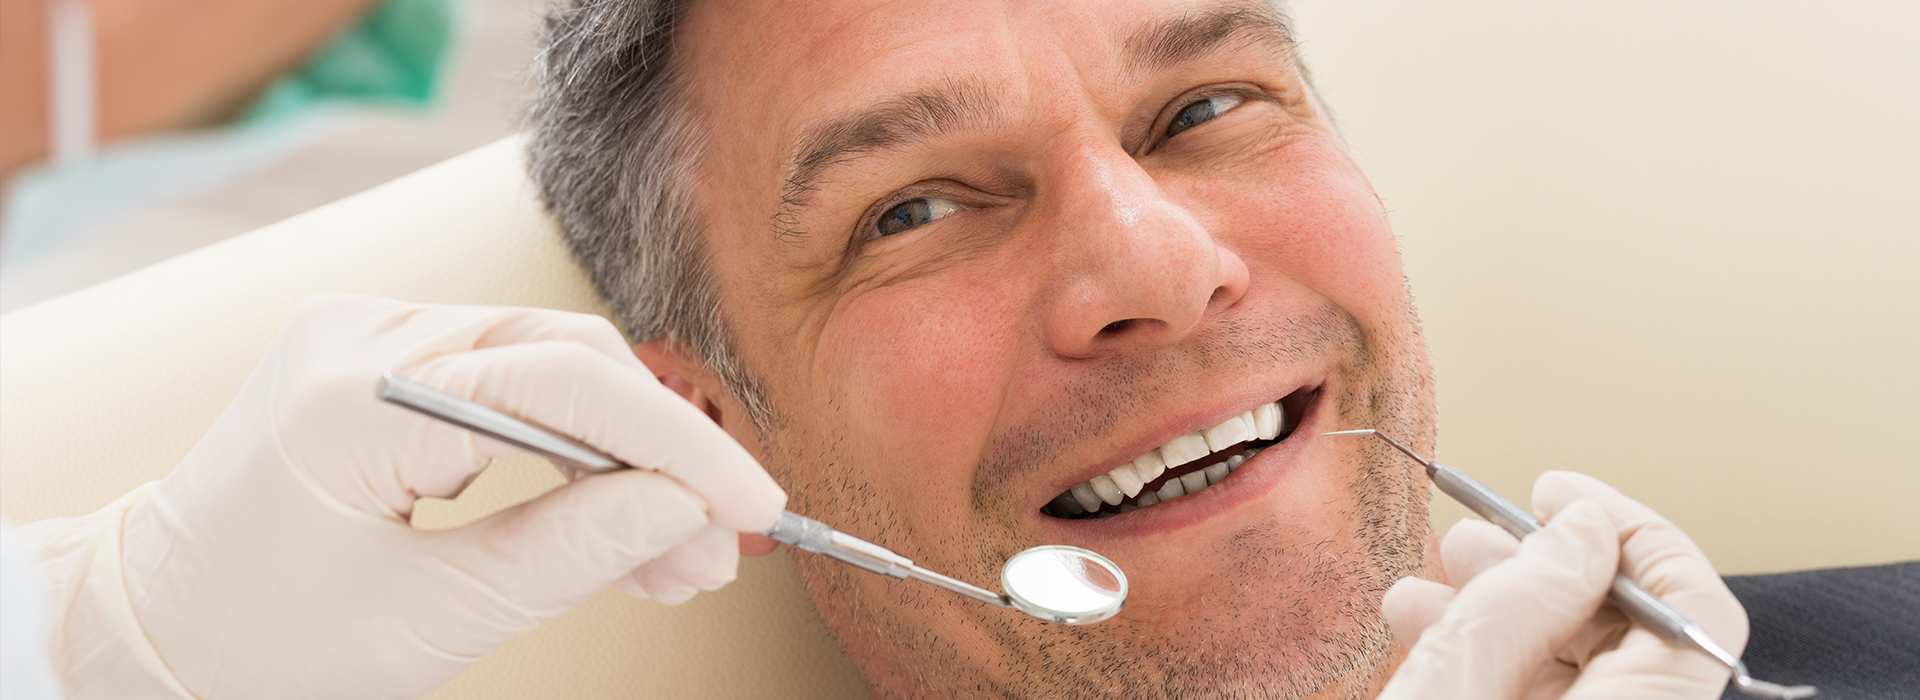 Almaden Valley Smile Design | Implant Restorations, Teeth-In-A-Day and Root Canals